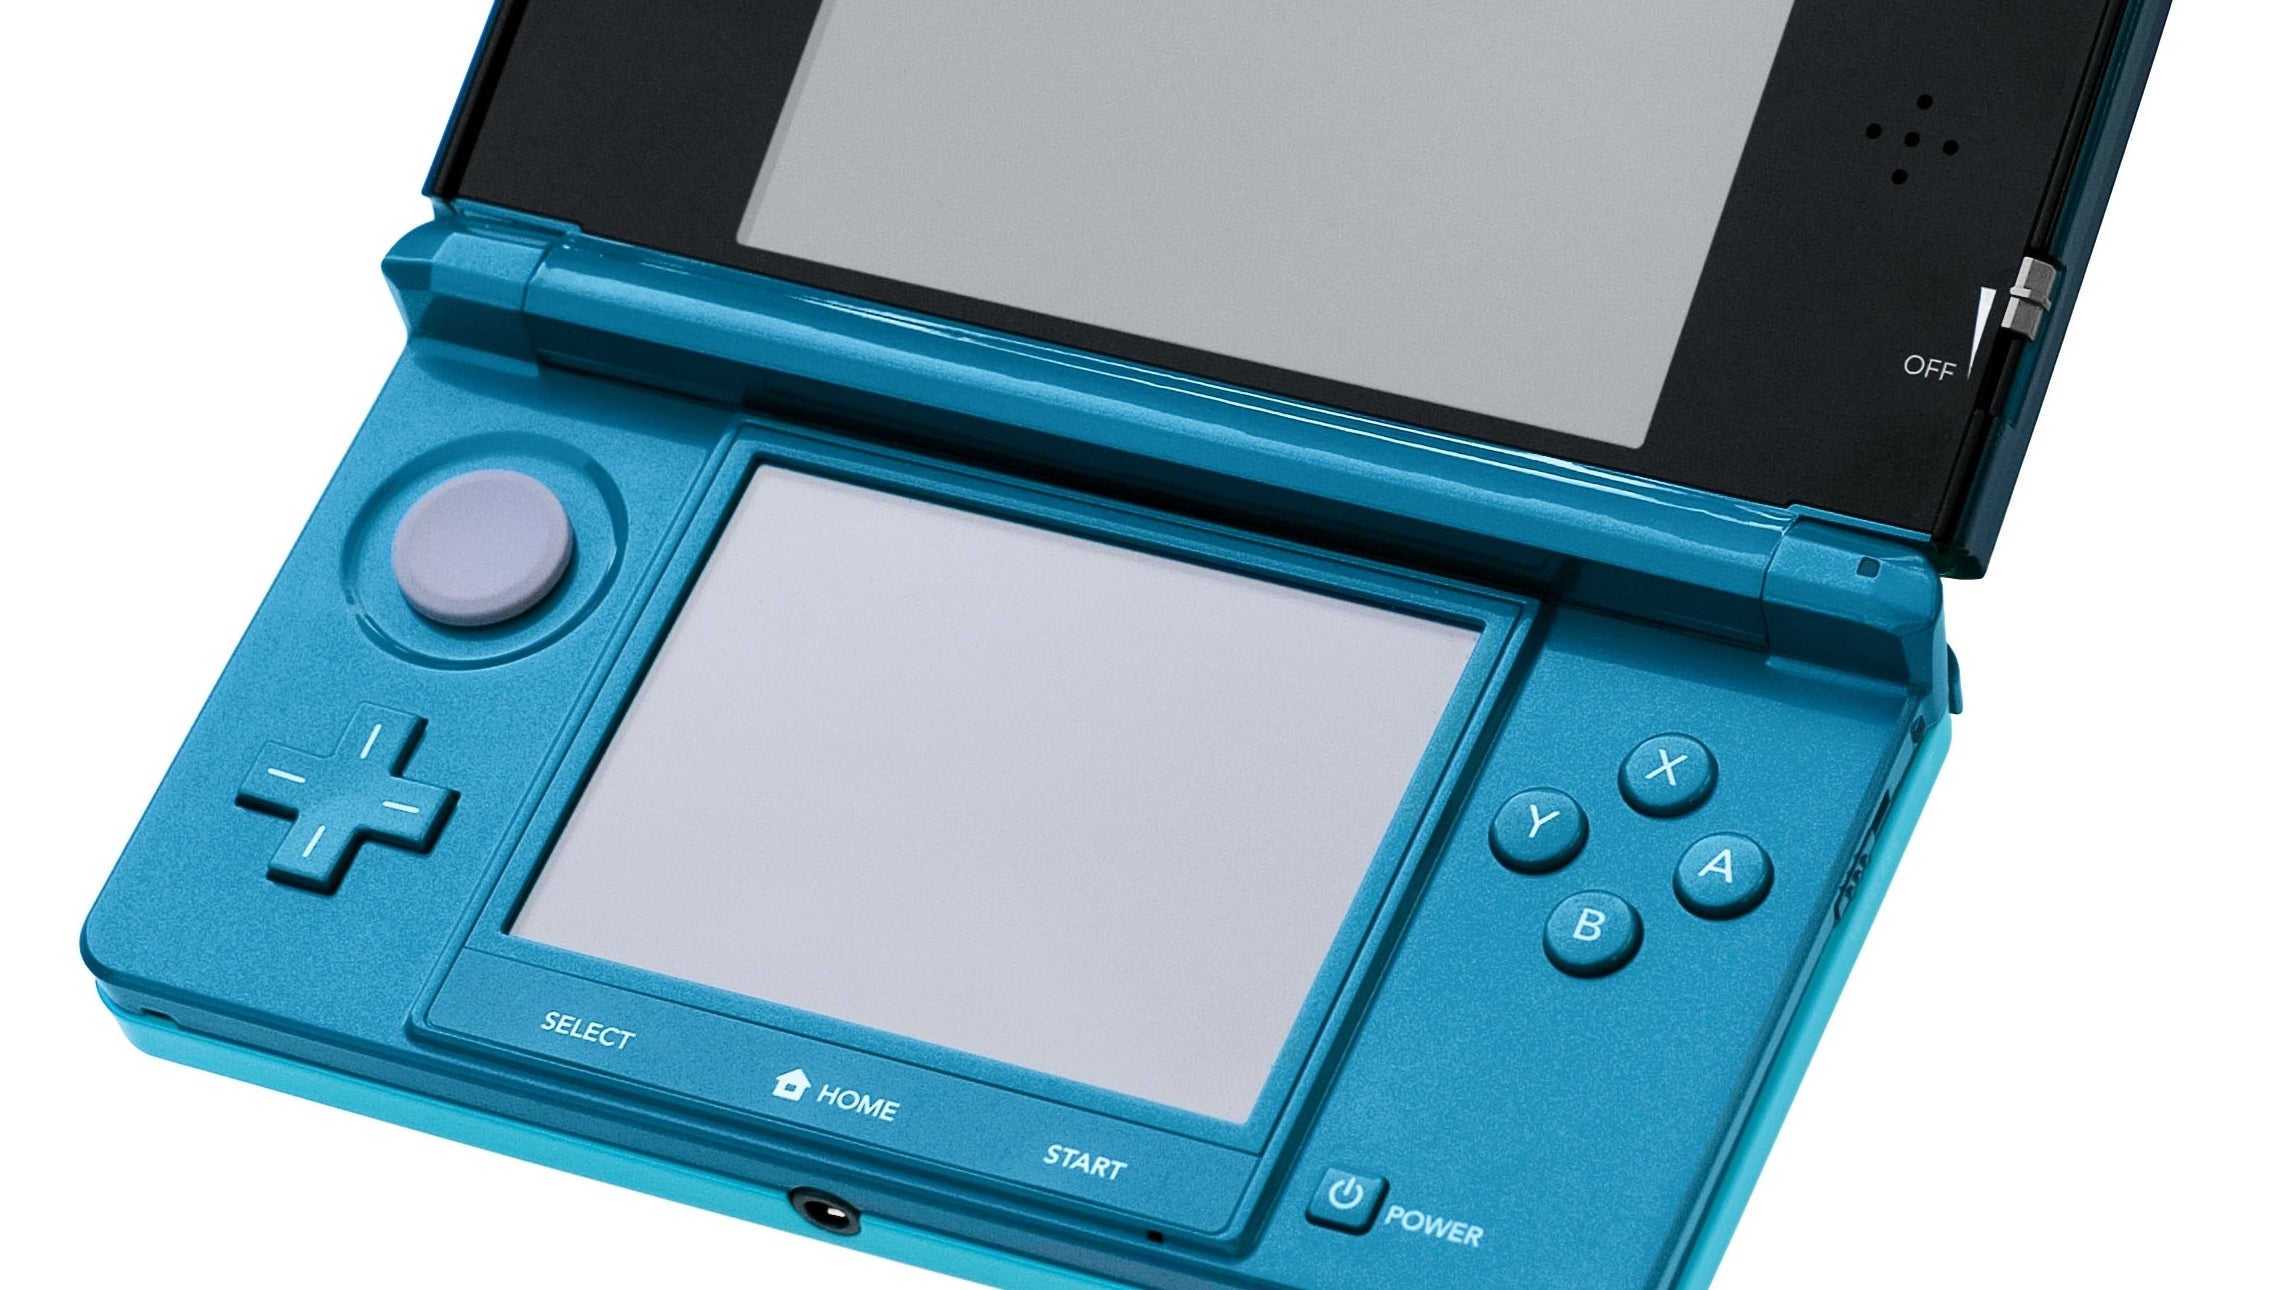 Image for Nintendo 3DS launched in Europe 10 years ago today